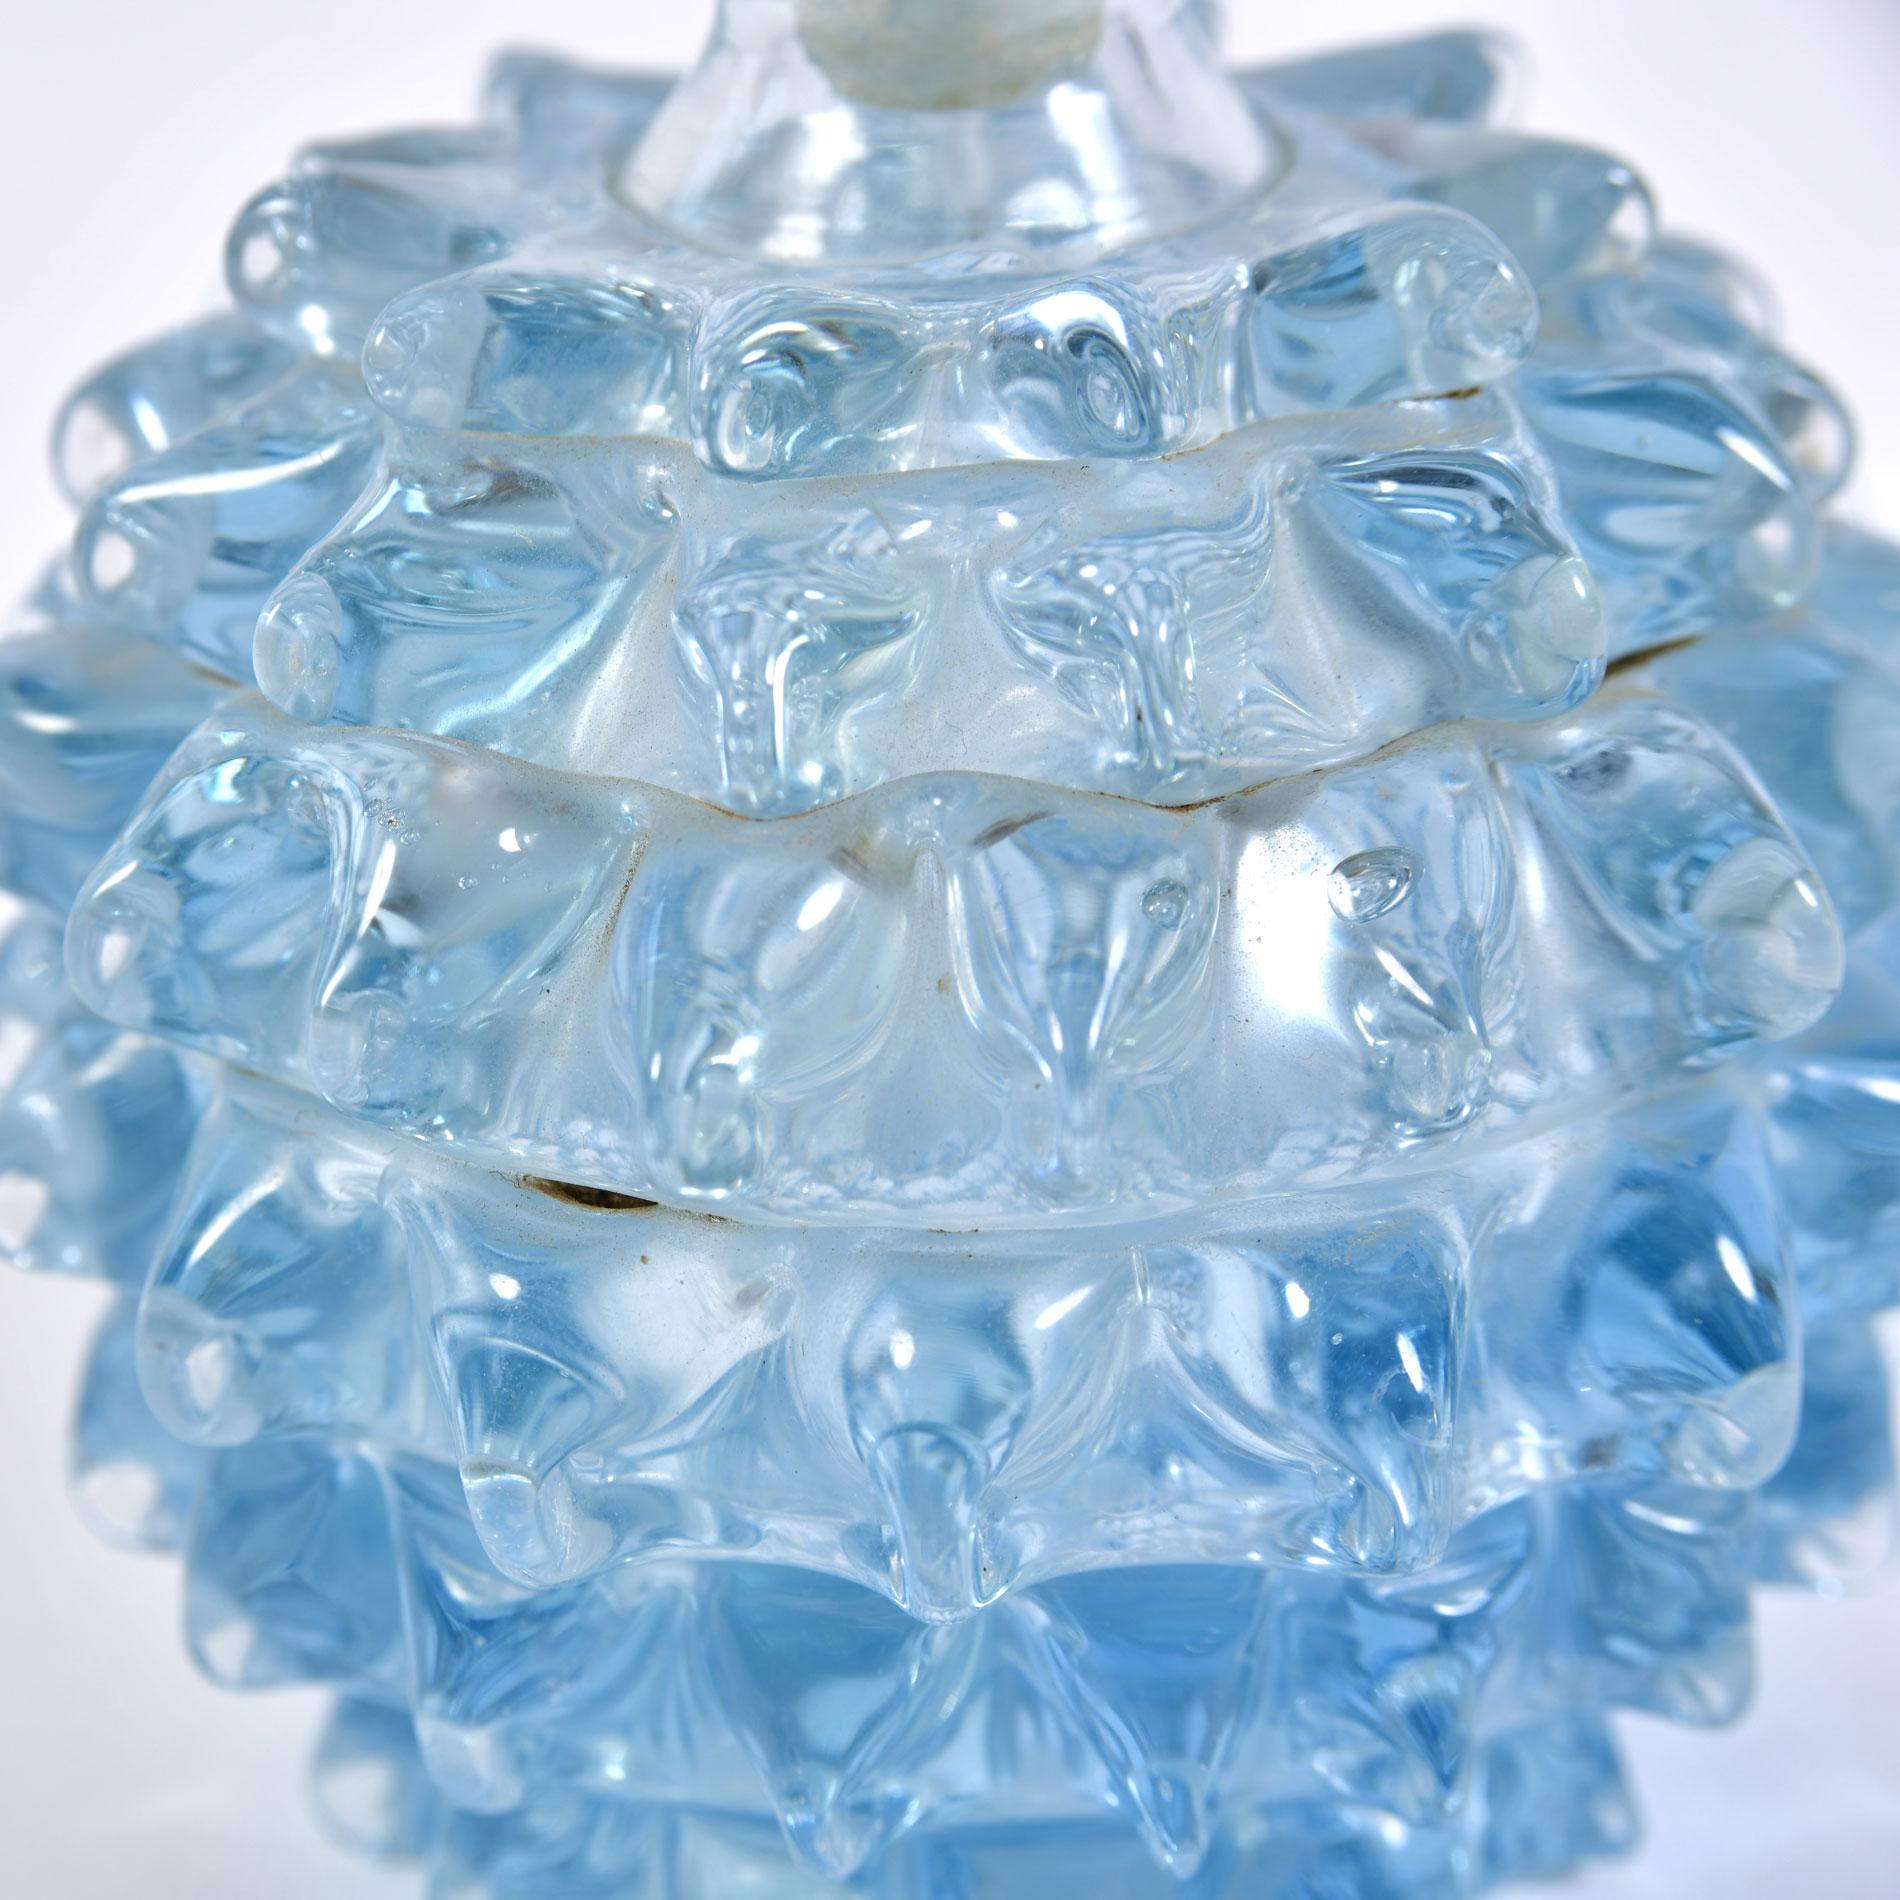 Decorative rostrato Barovier e Toso perfume bottle with matching dimpled stopper. Gorgeous in blue.
     